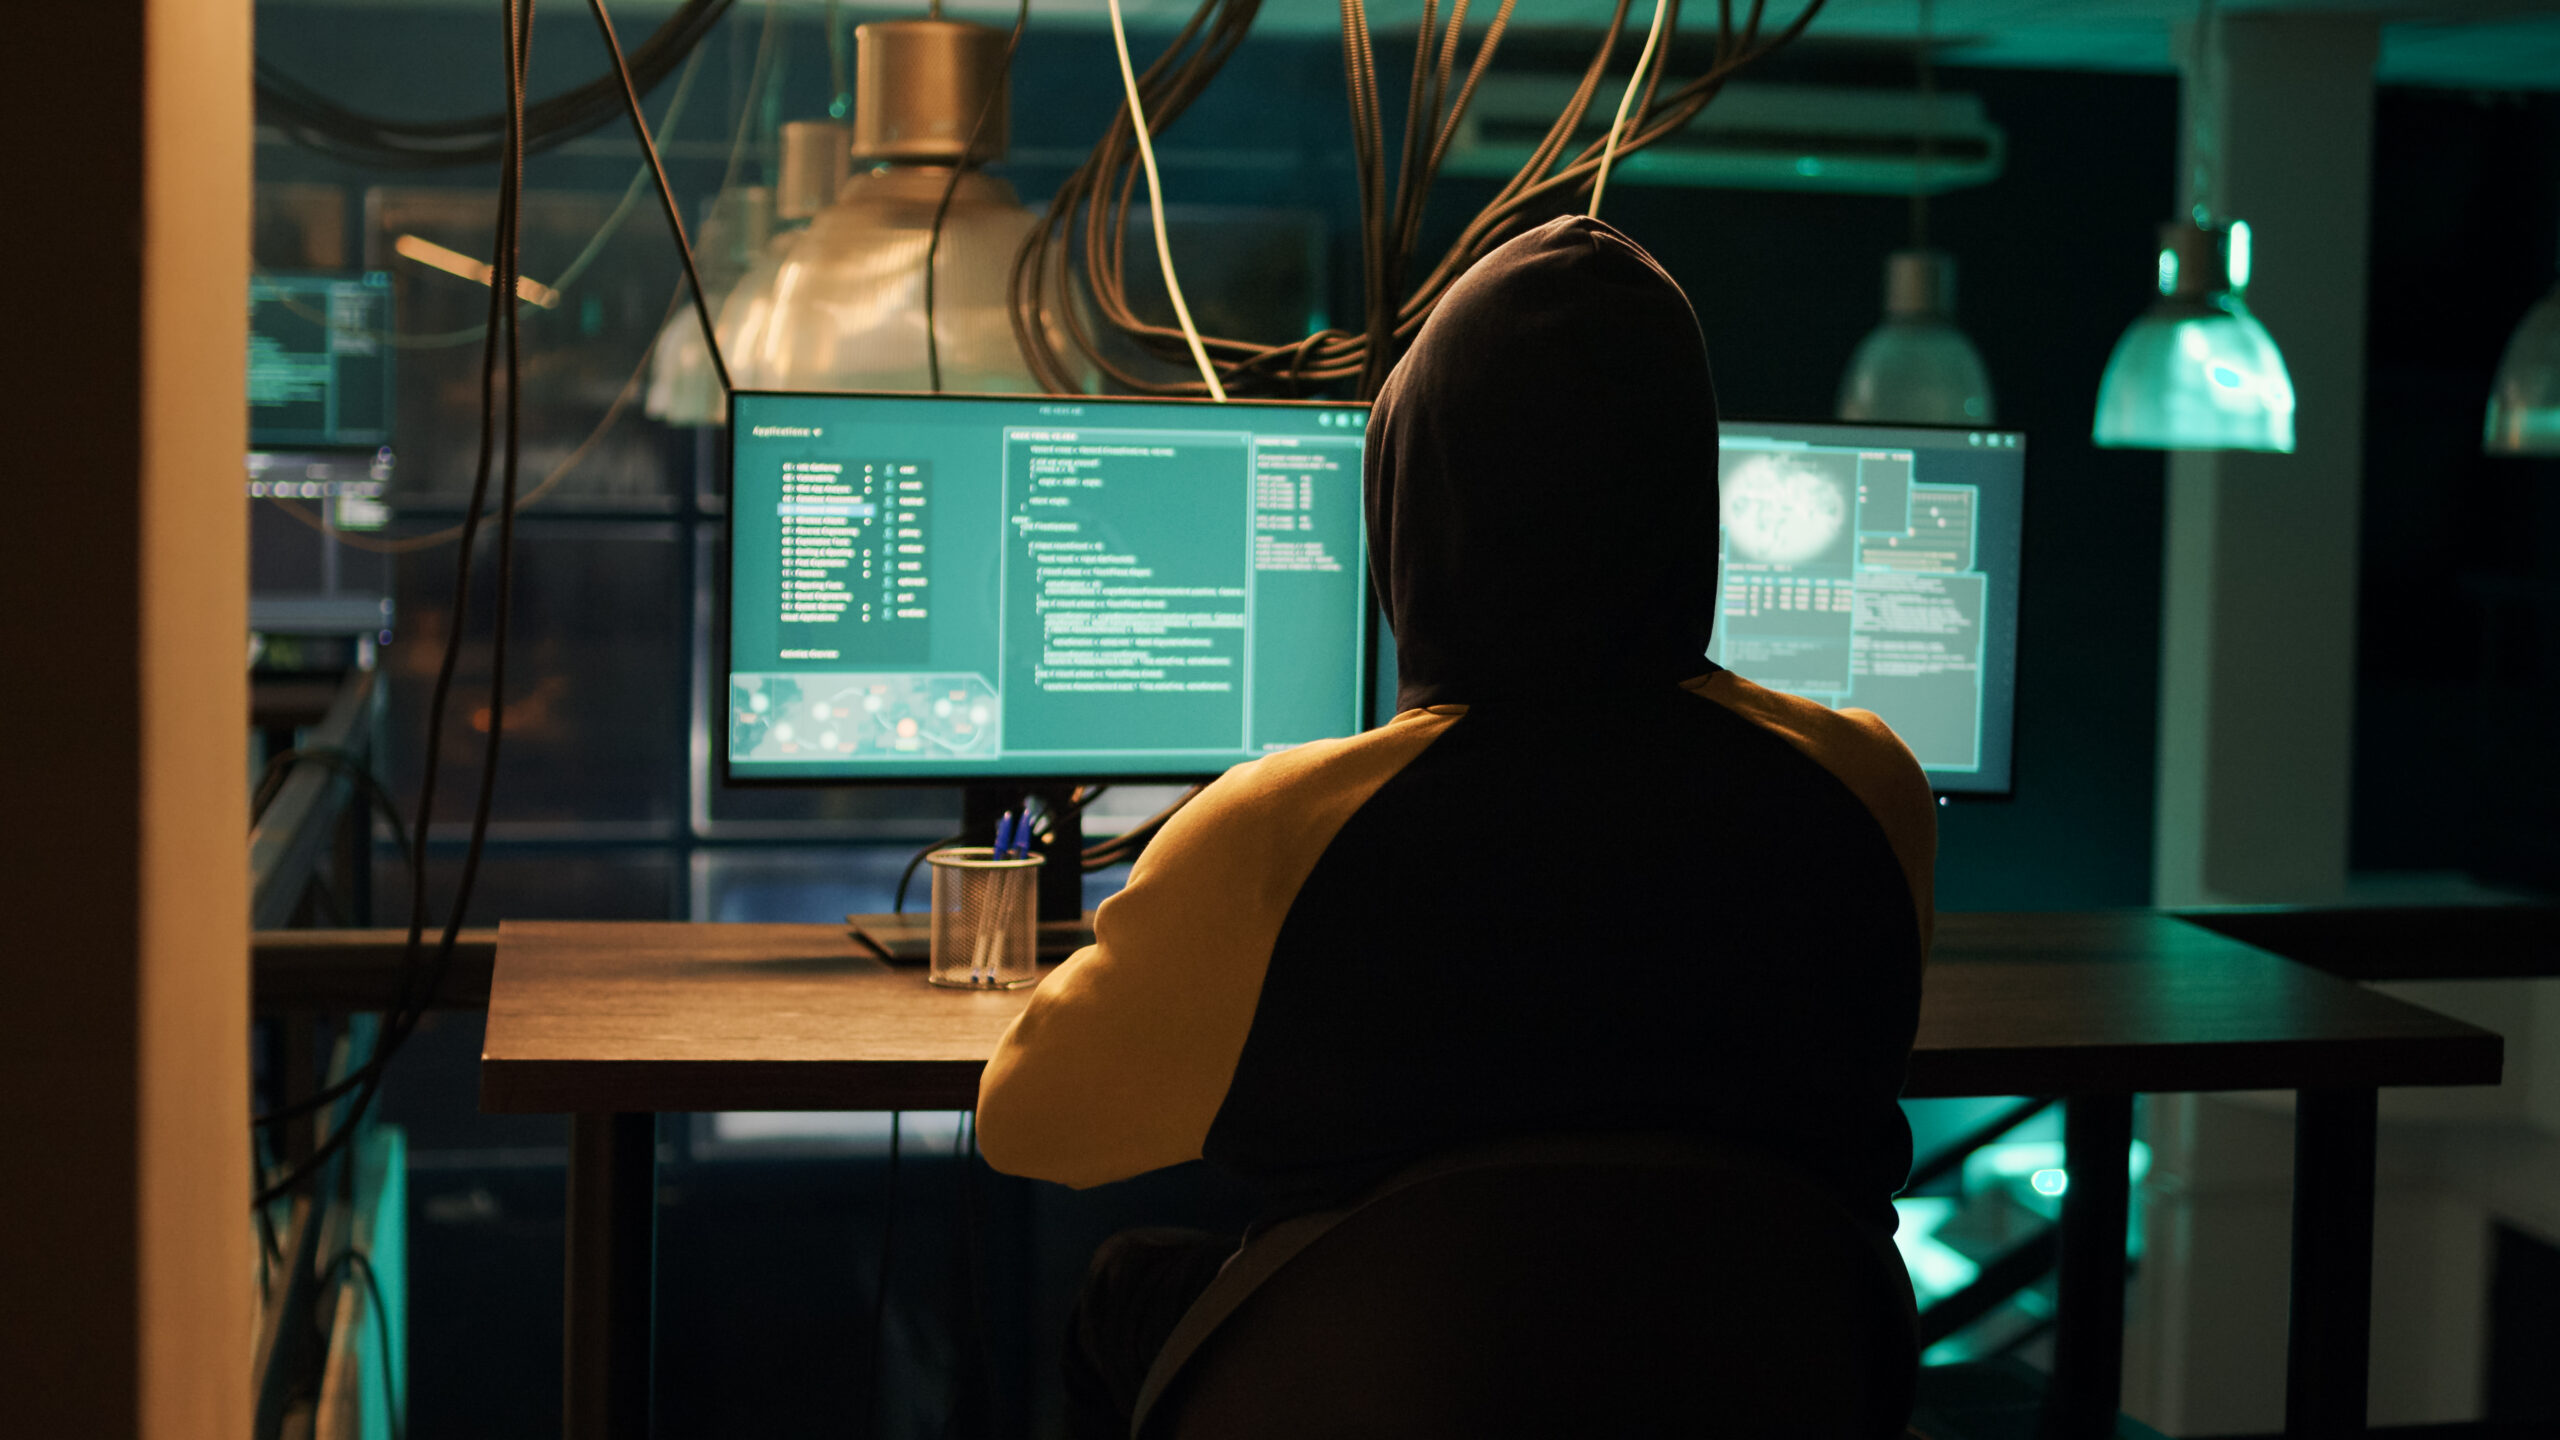 Hackers using network vulnerability to exploit security server, trying to break computer system at night. People working with multiple monitors to hack software, illegal hacktivism.